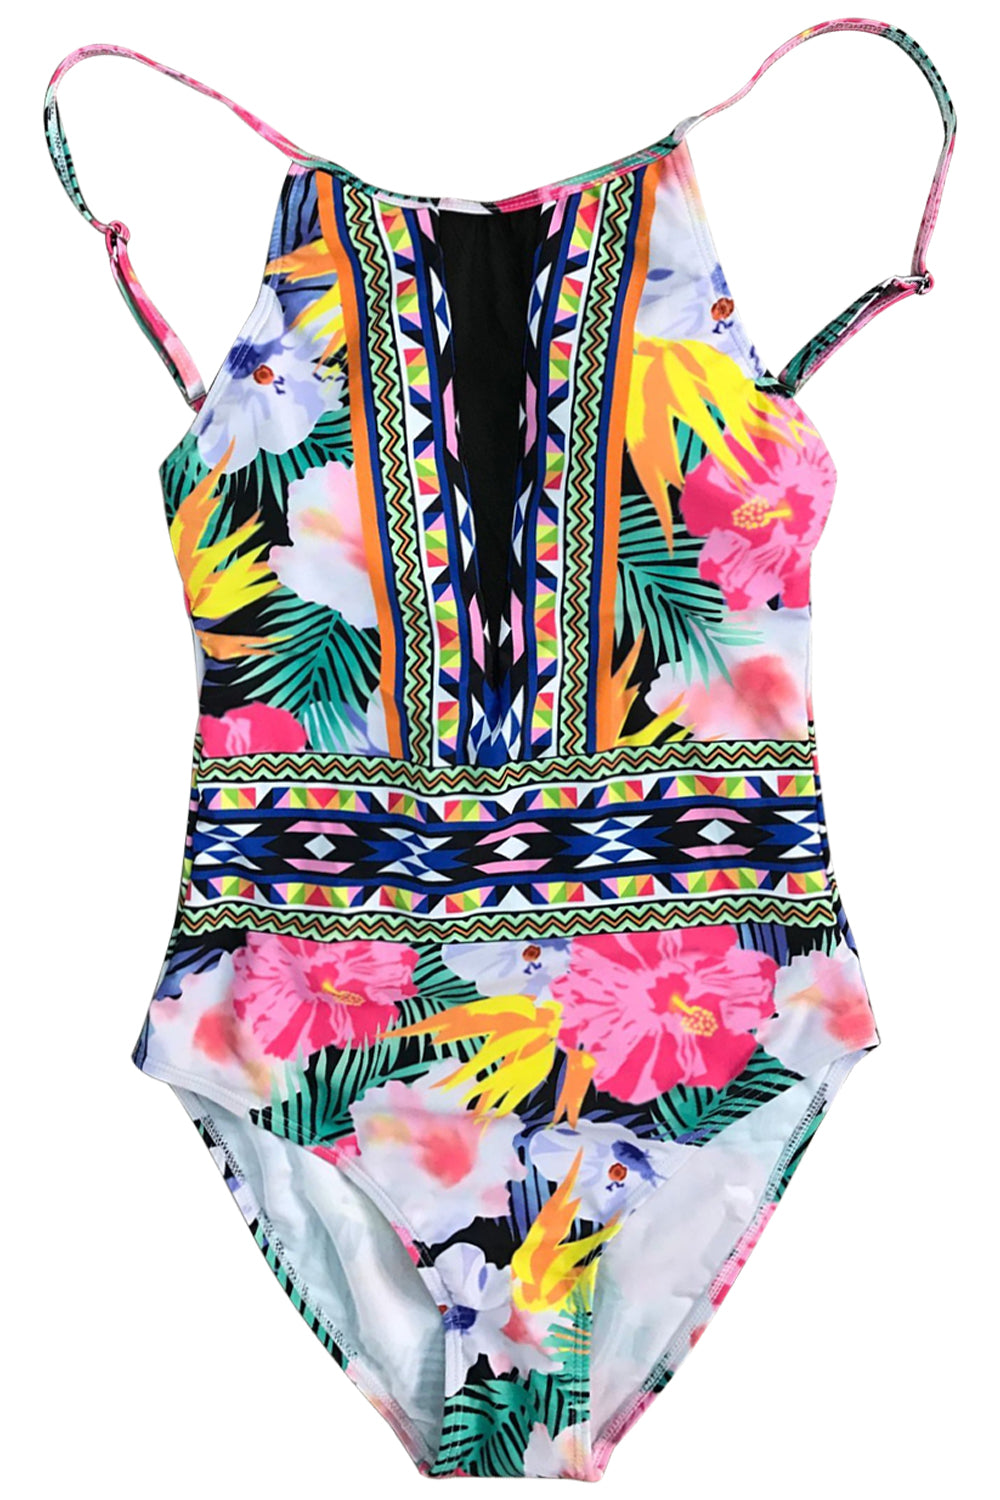 Iyasson Floral Printing Mesh Splicing One-piece Swimsuit